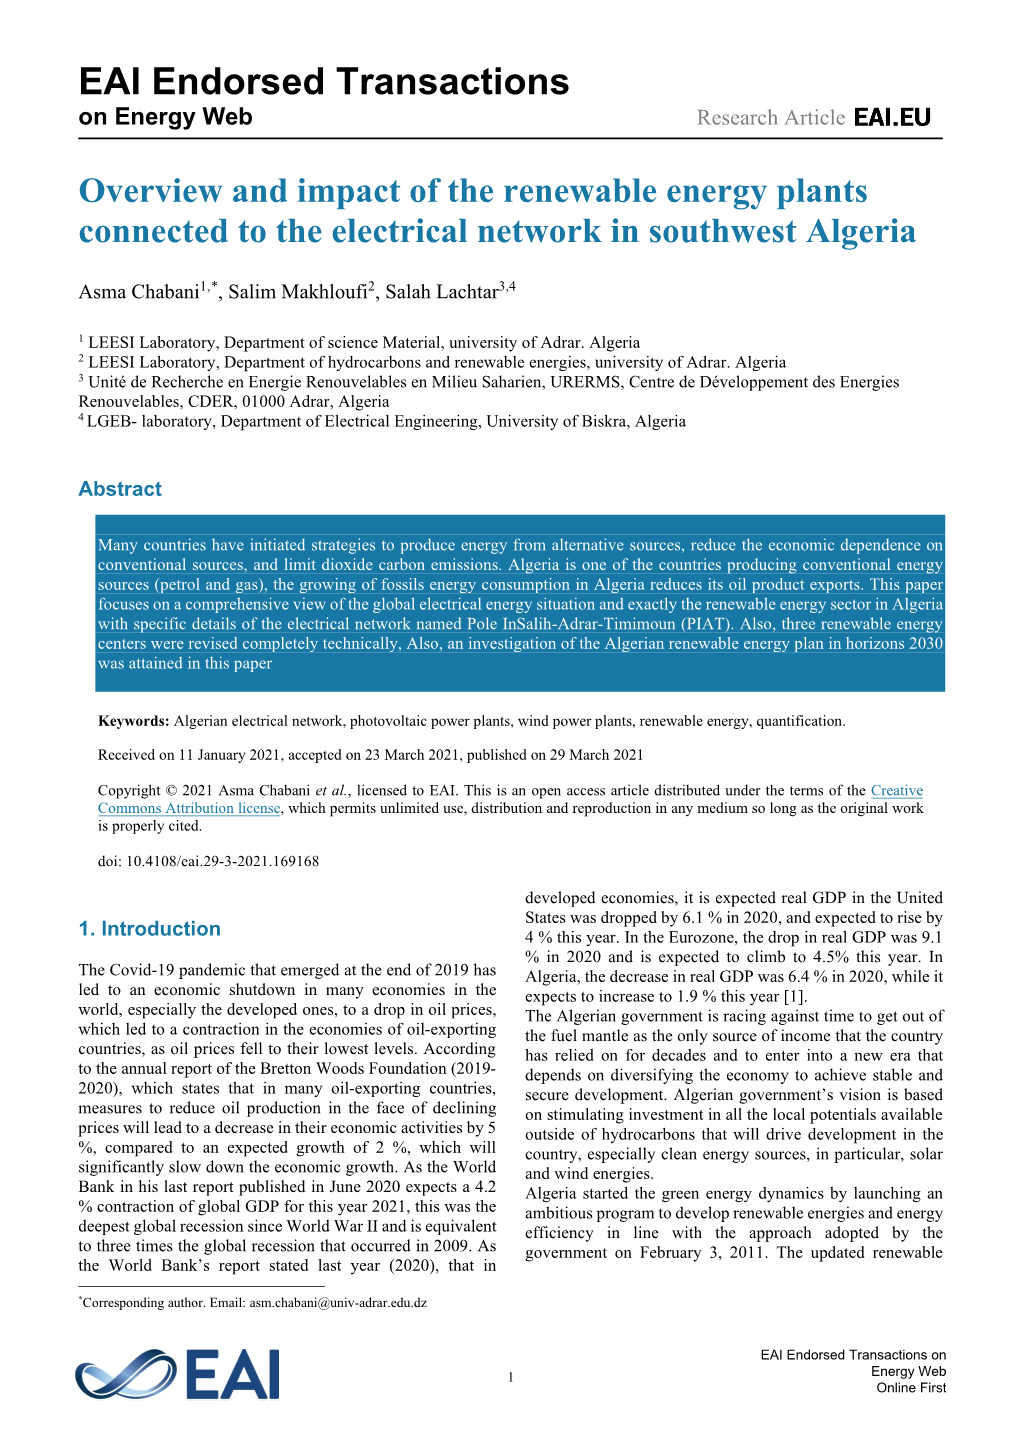 Quantification and Impact of the Renewable Energy Plants Connected to the Electrical Network in Southwest Algeria